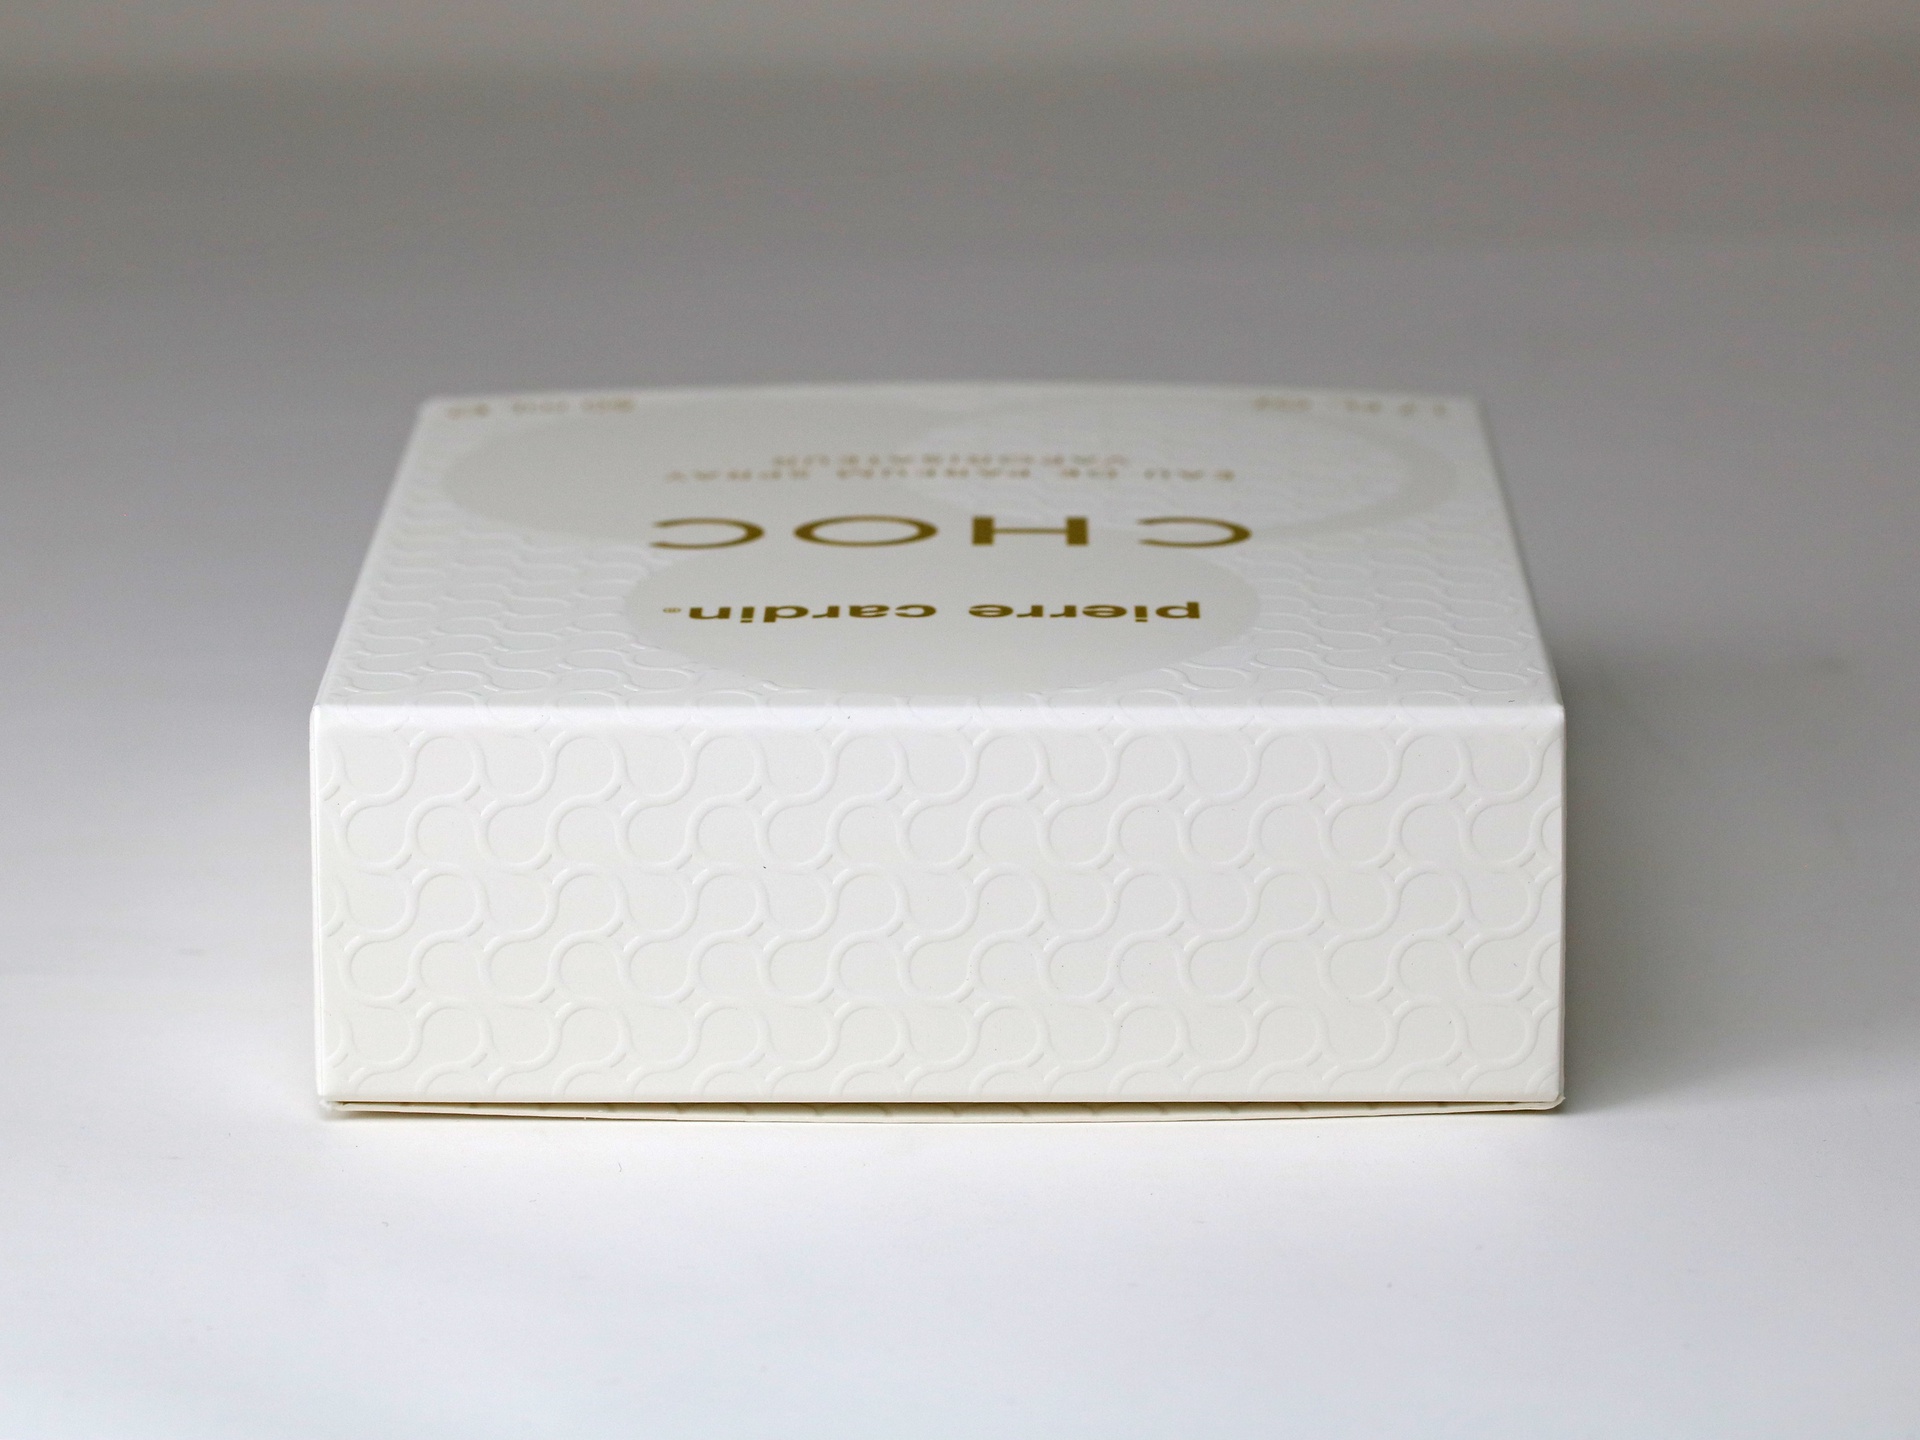 Pierre Cardin Choc folding carton features soft touch coating